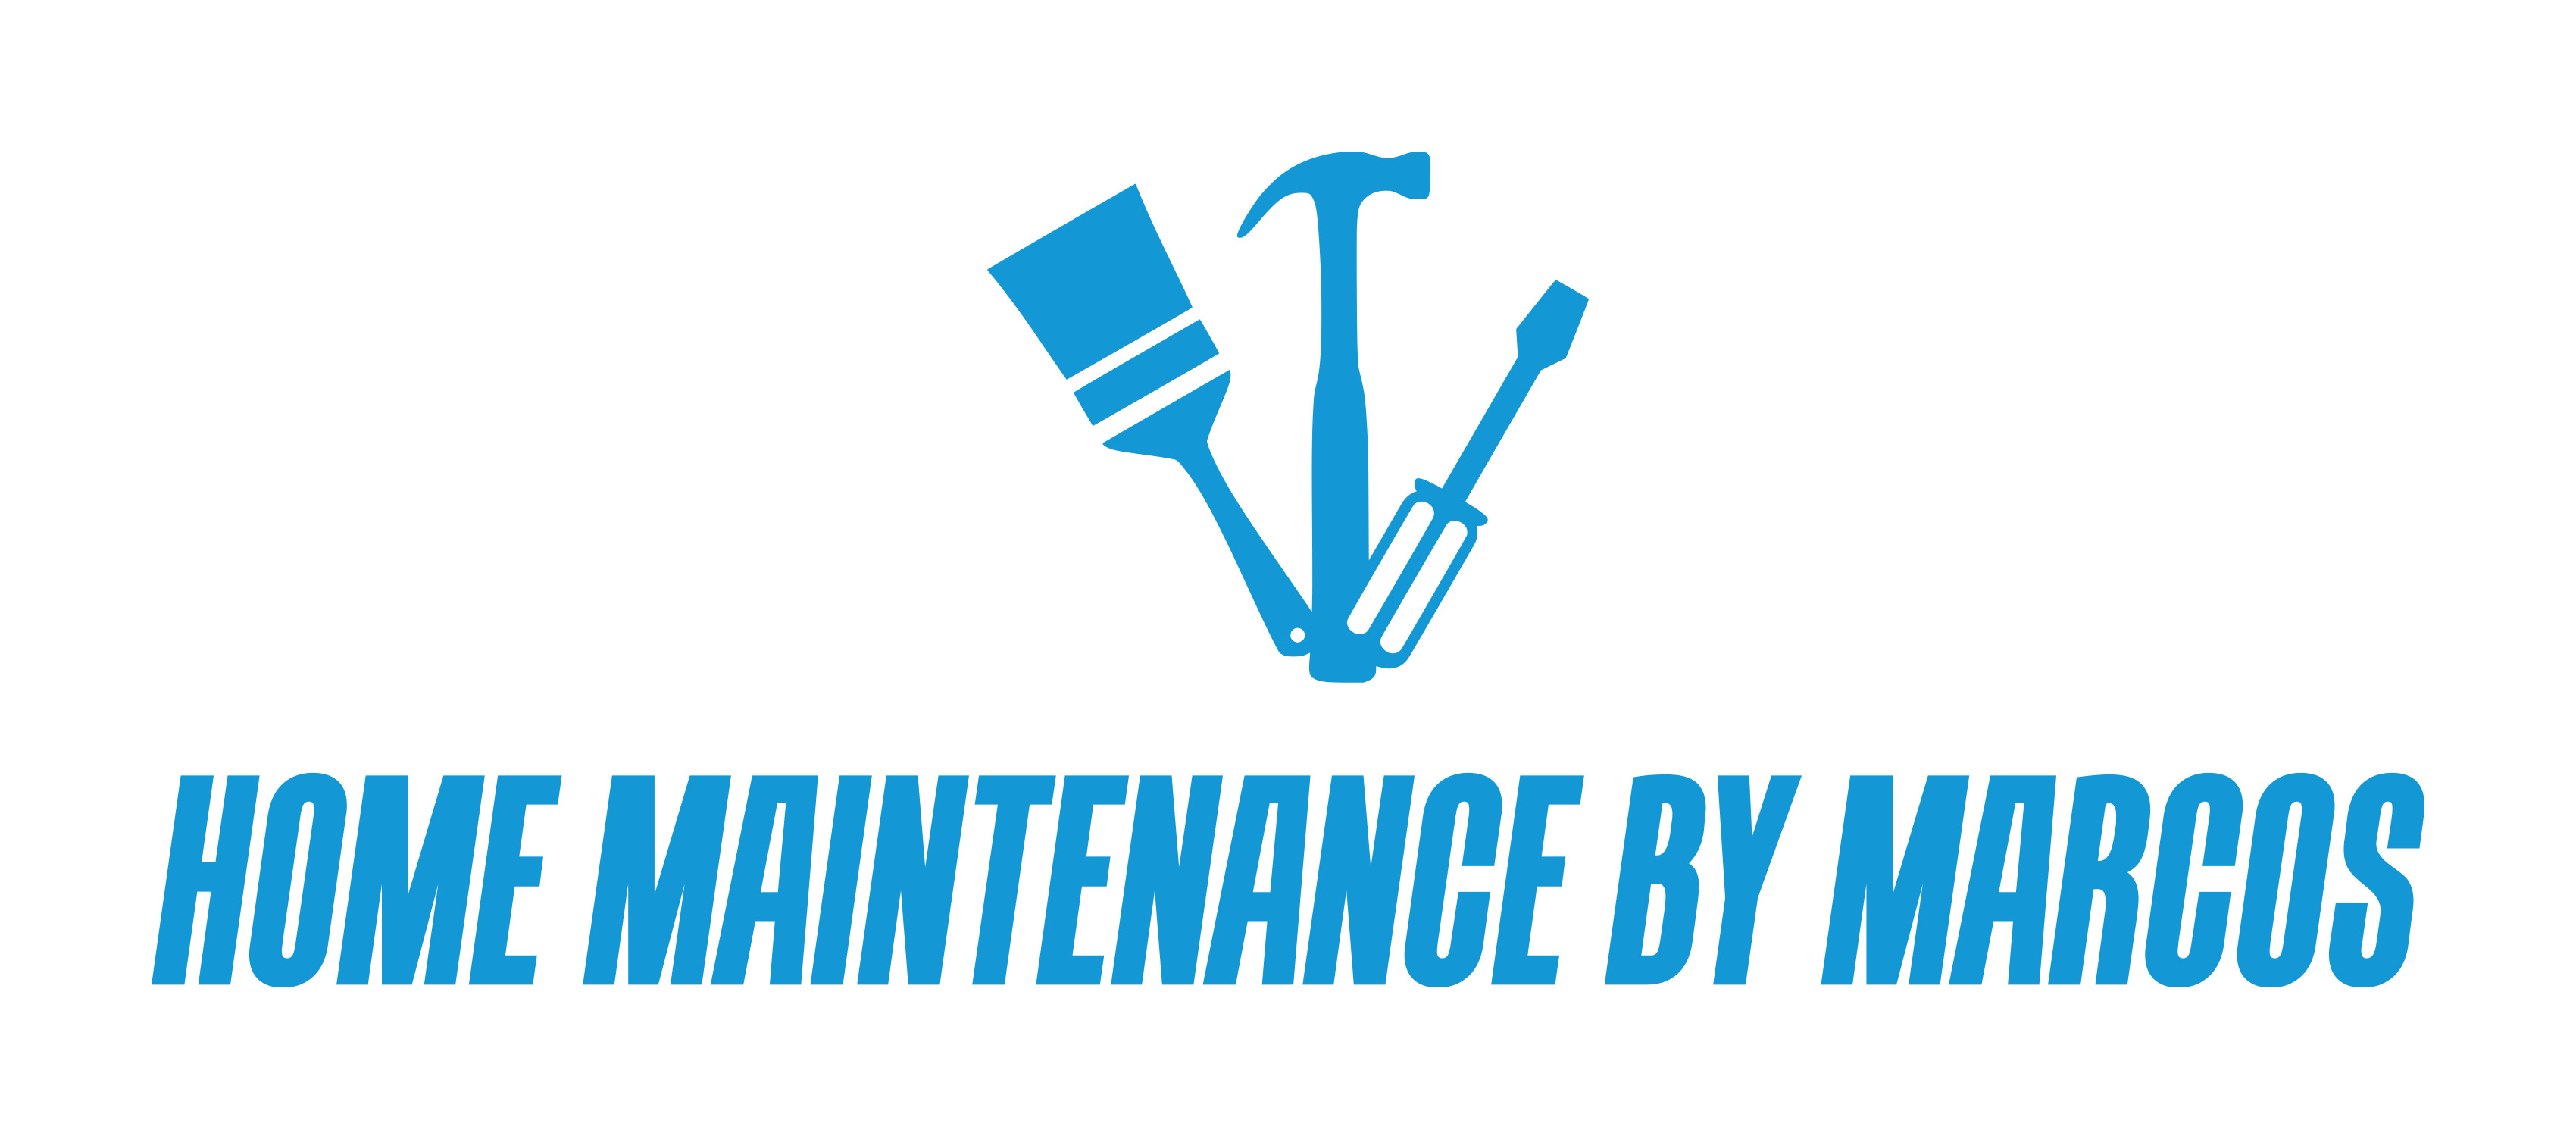 Home Maintenance by Marcos Logo